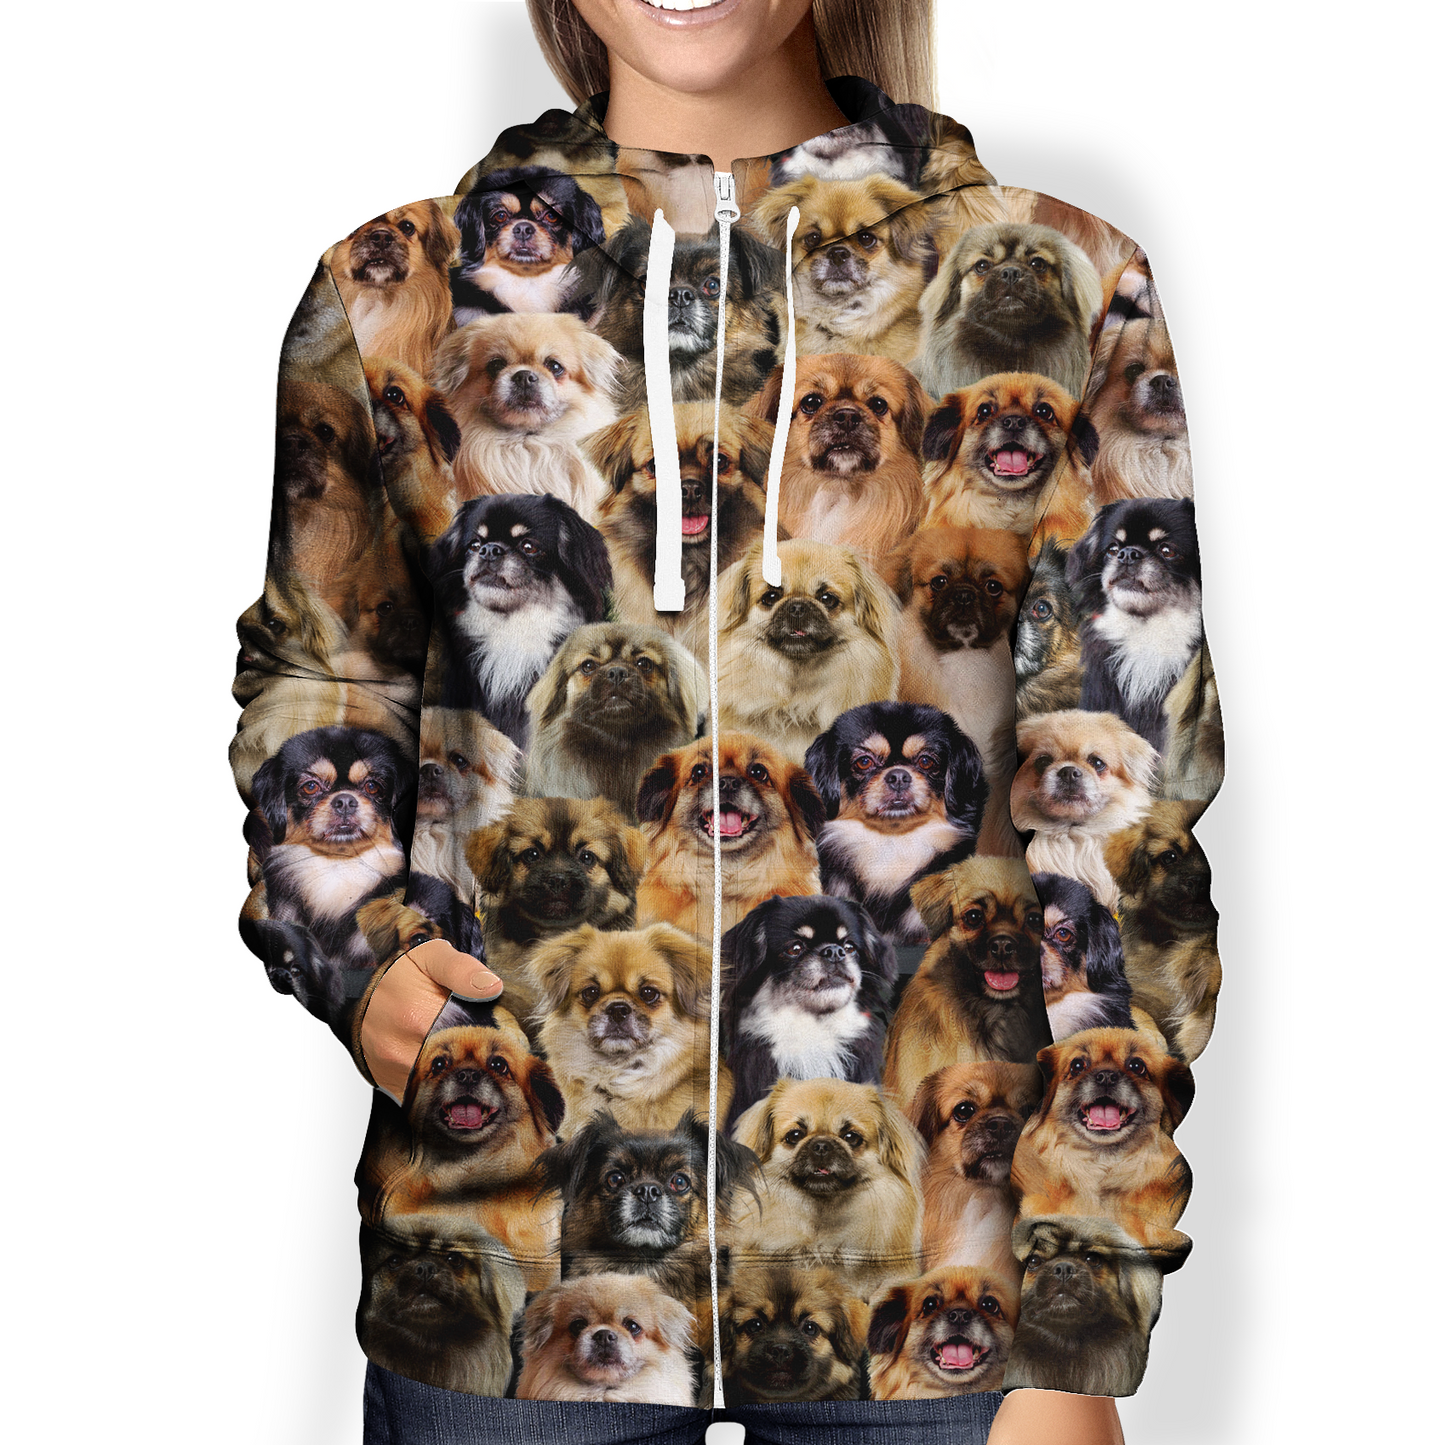 You Will Have A Bunch Of Tibetan Spaniels - Hoodie V1